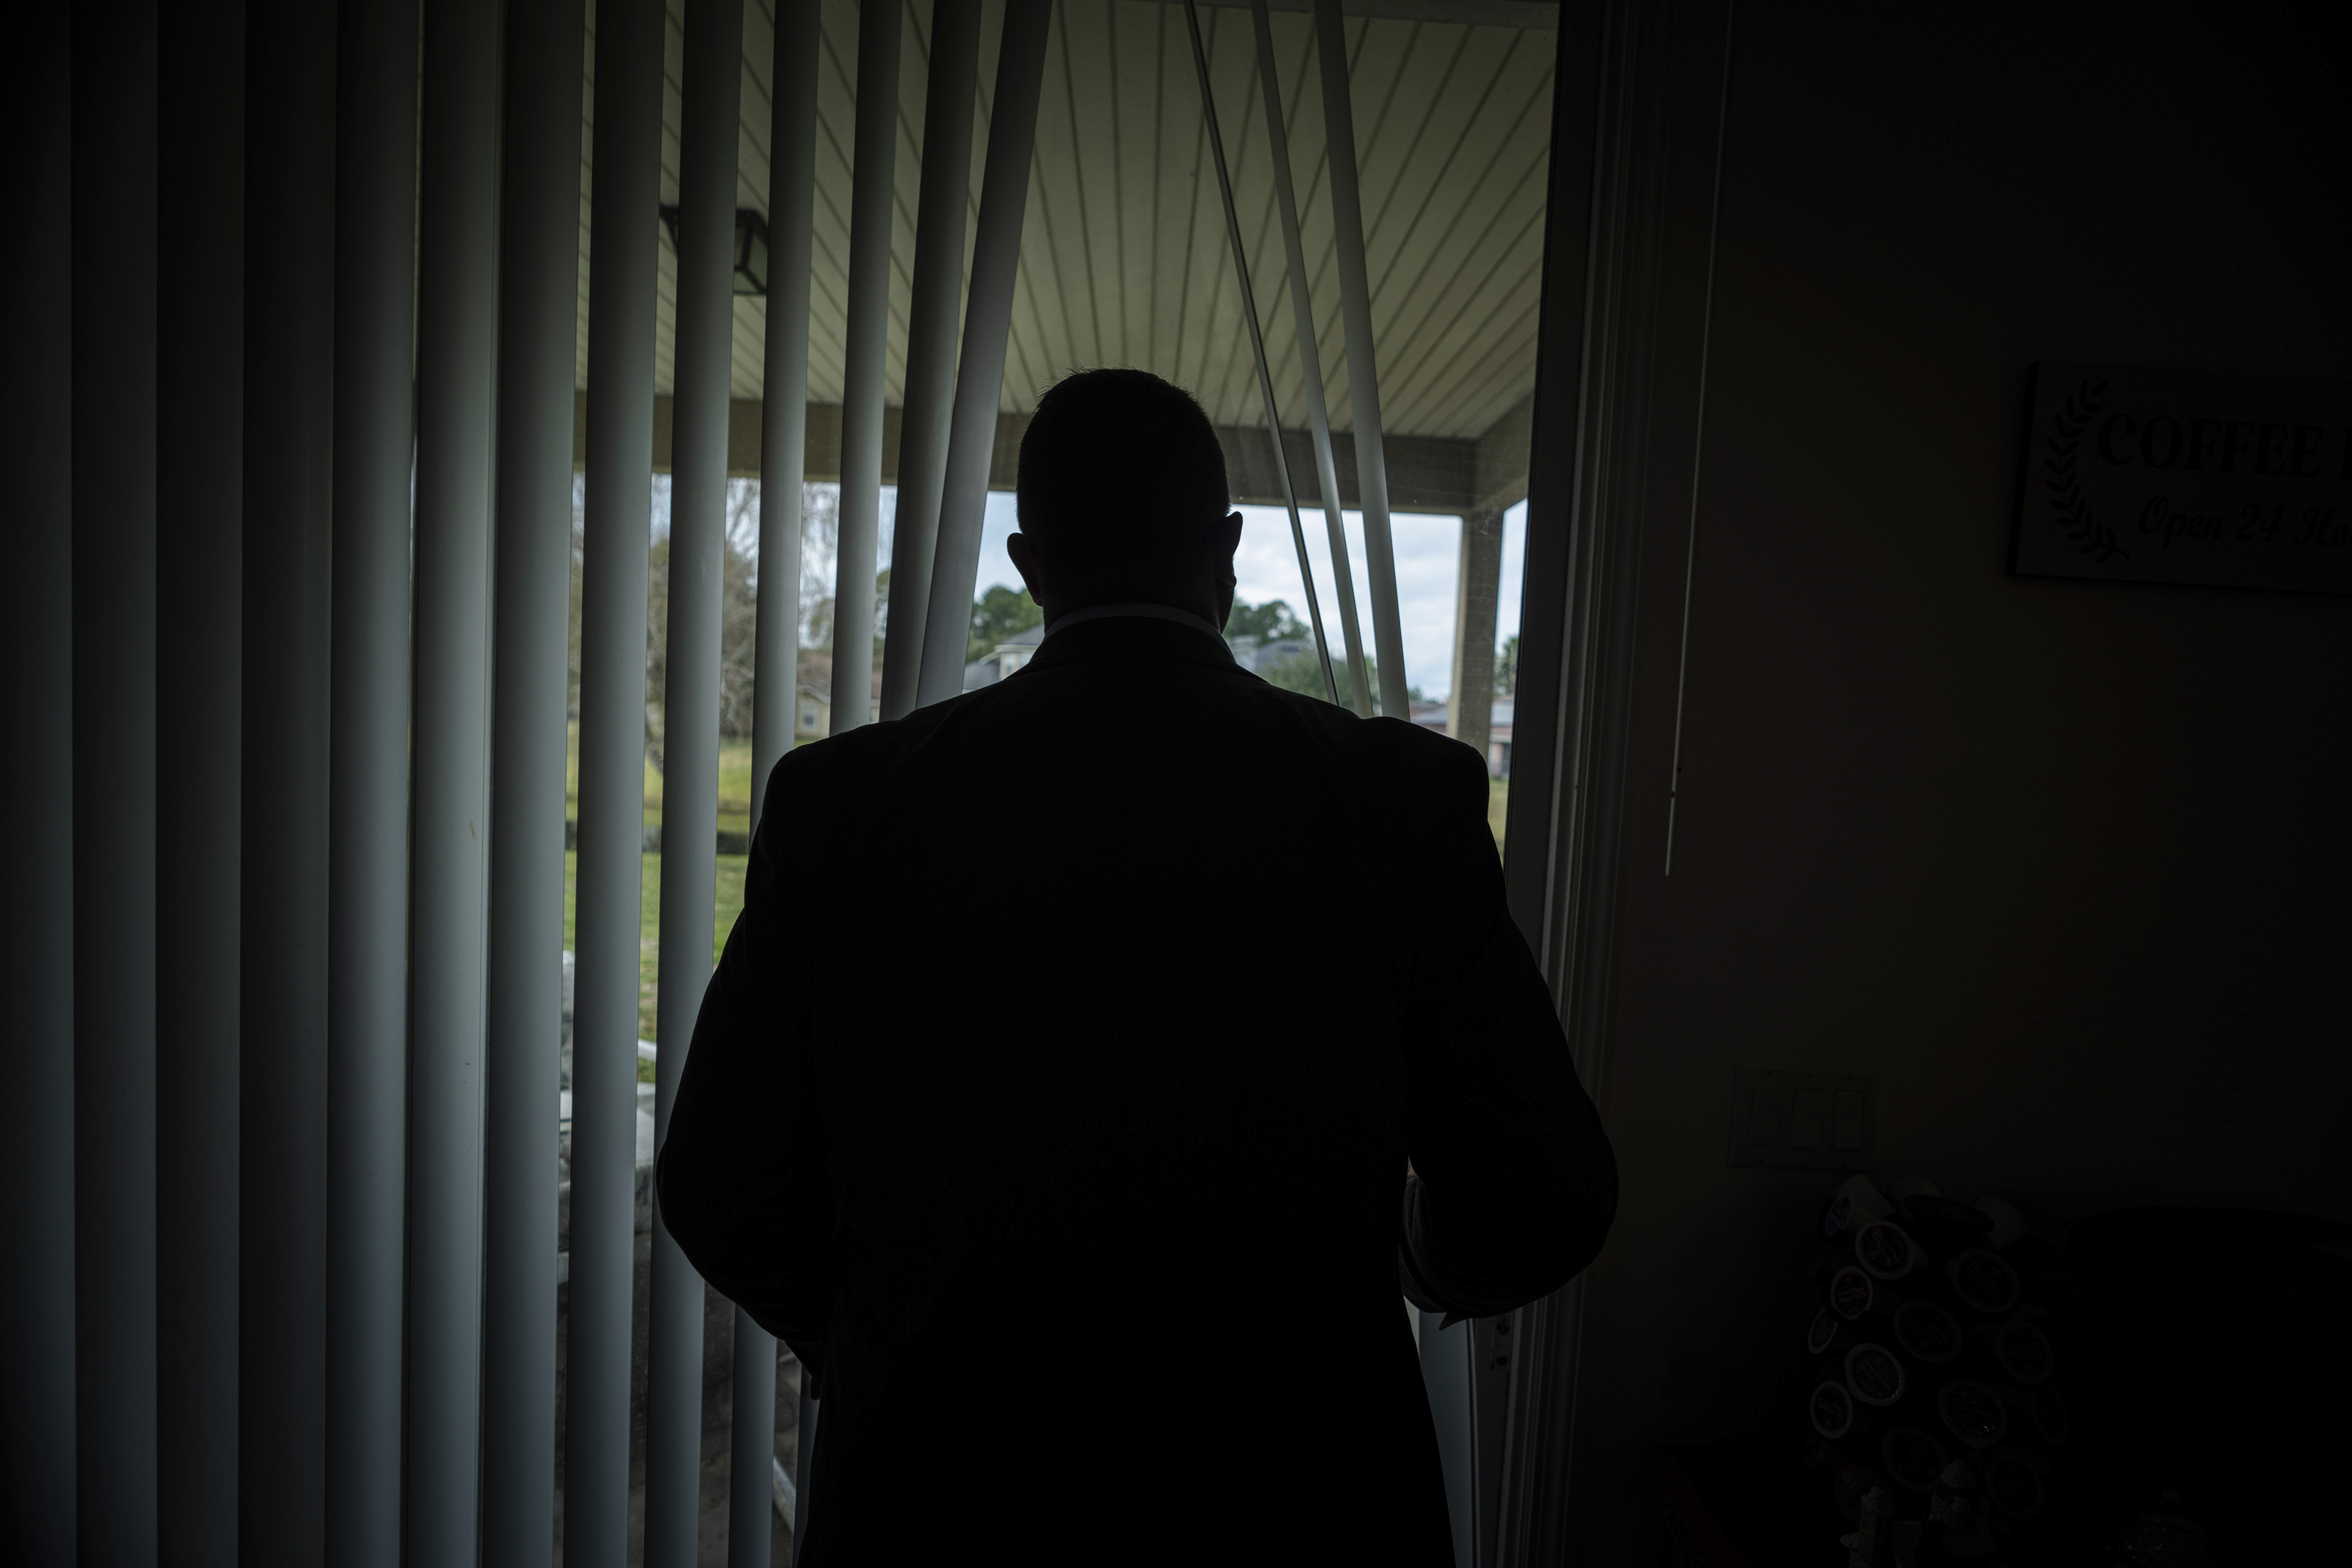 Joseph Moore looks out of a window at his home in Jacksonville, Florida.